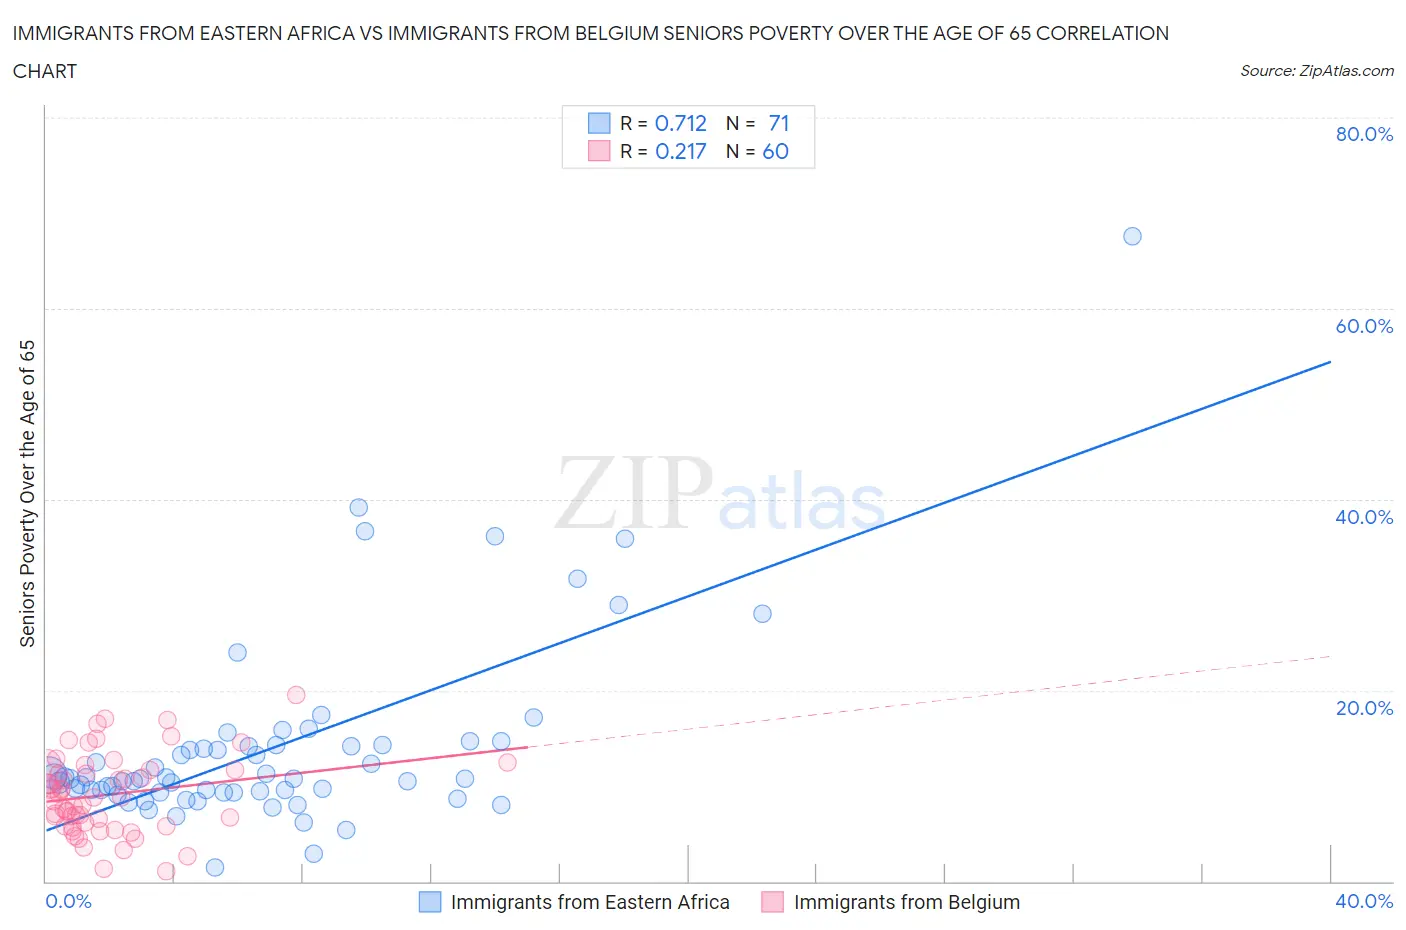 Immigrants from Eastern Africa vs Immigrants from Belgium Seniors Poverty Over the Age of 65